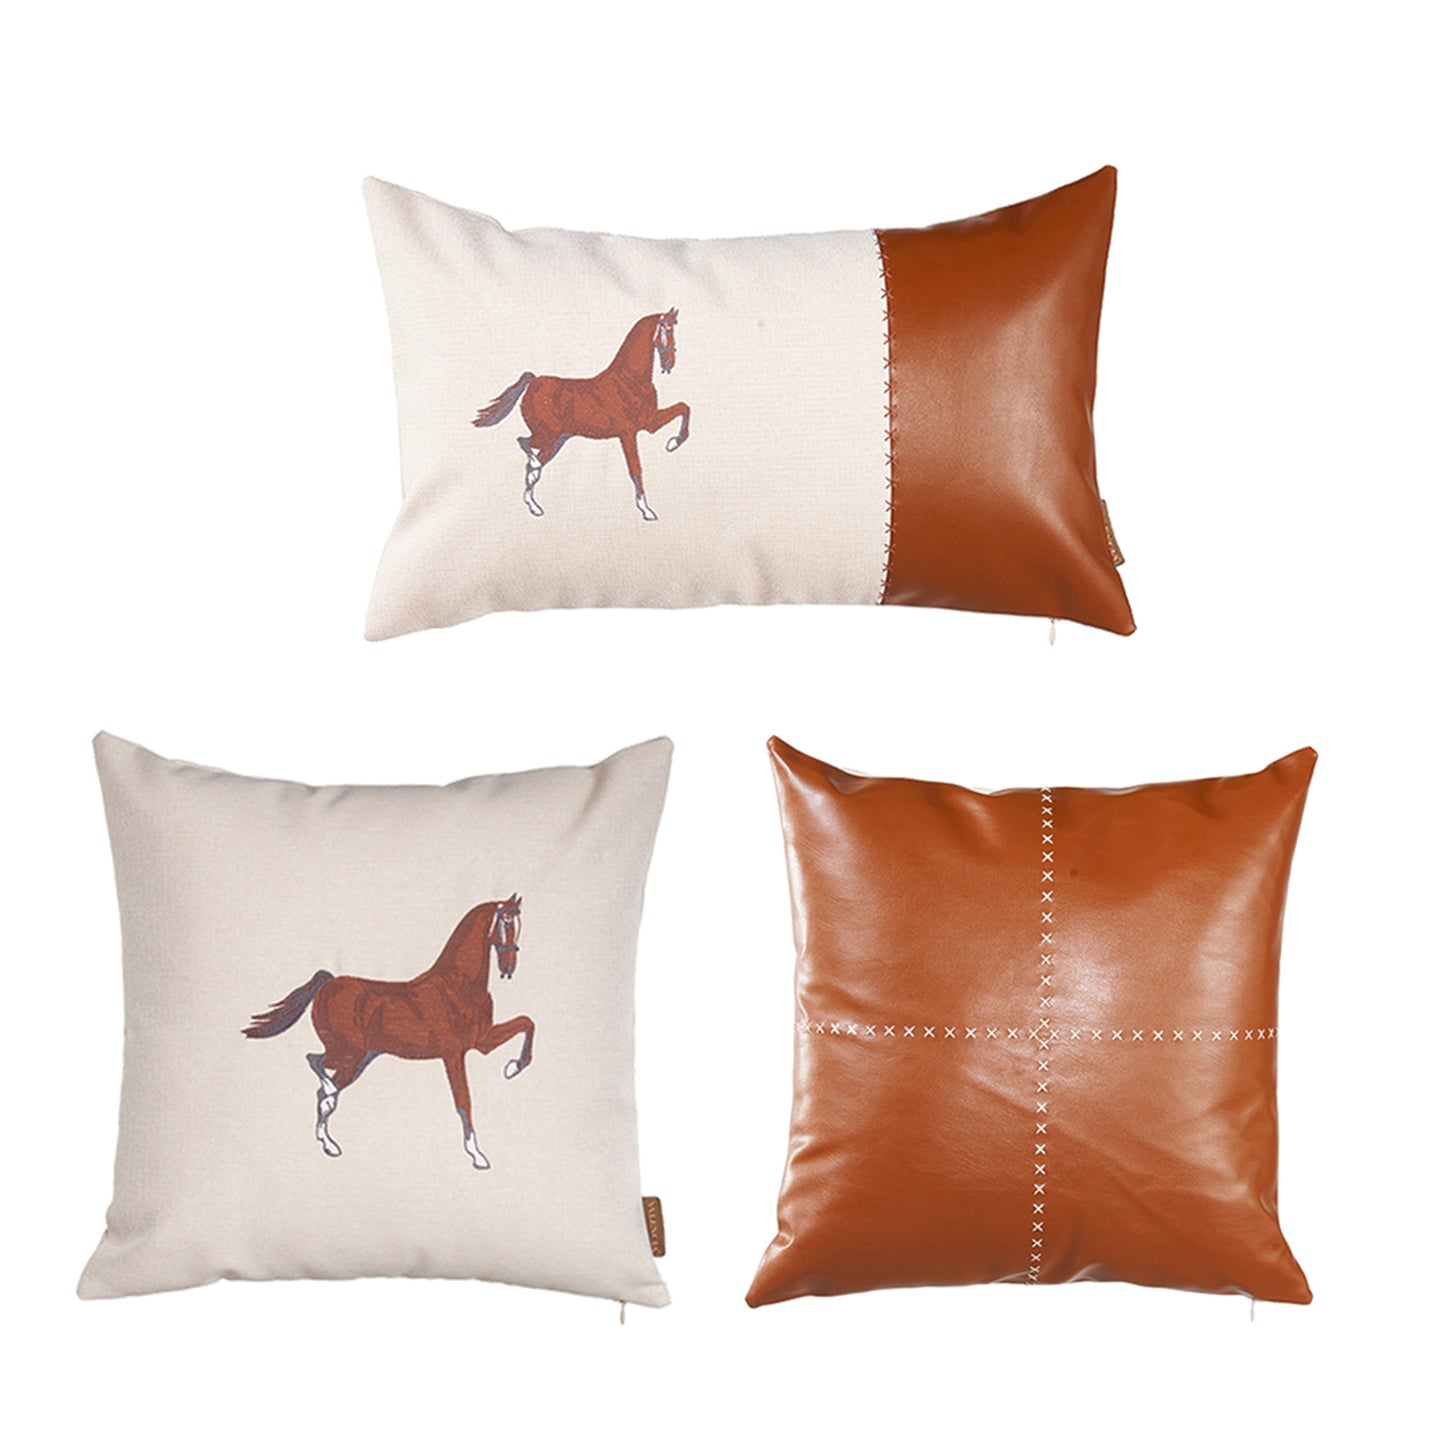 Boho Embroidered Horse Set of 3 Throw Pillow 12" x 20" & 18" x 18" Vegan Faux Leather Solid Beige & Brown for Couch, Bedding